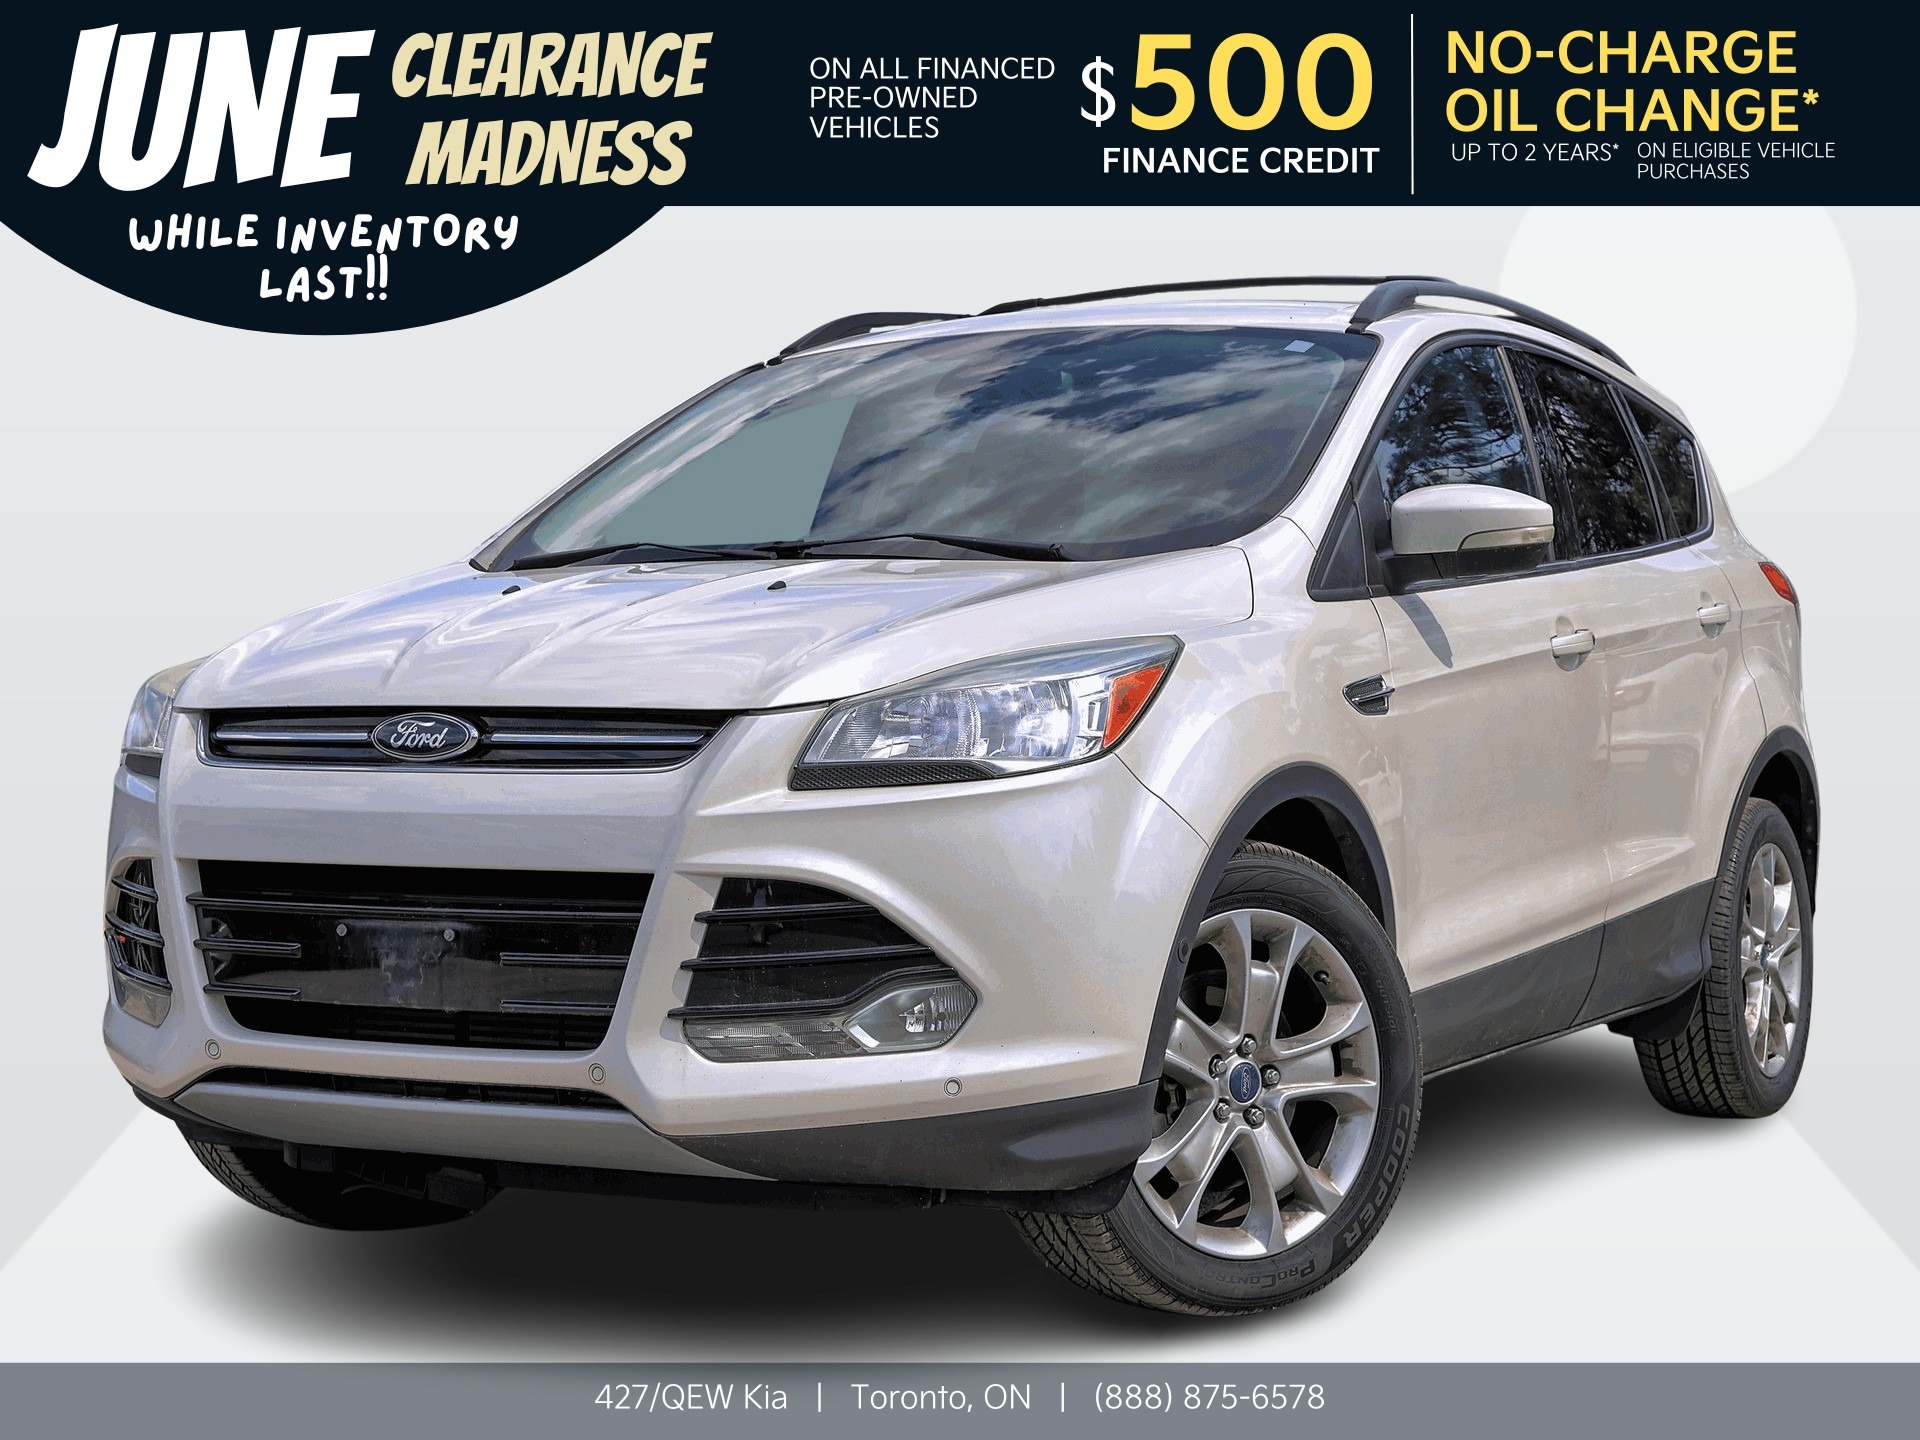 2013 Ford Escape SEL | Power Liftgate | Heated Seat | Cruise